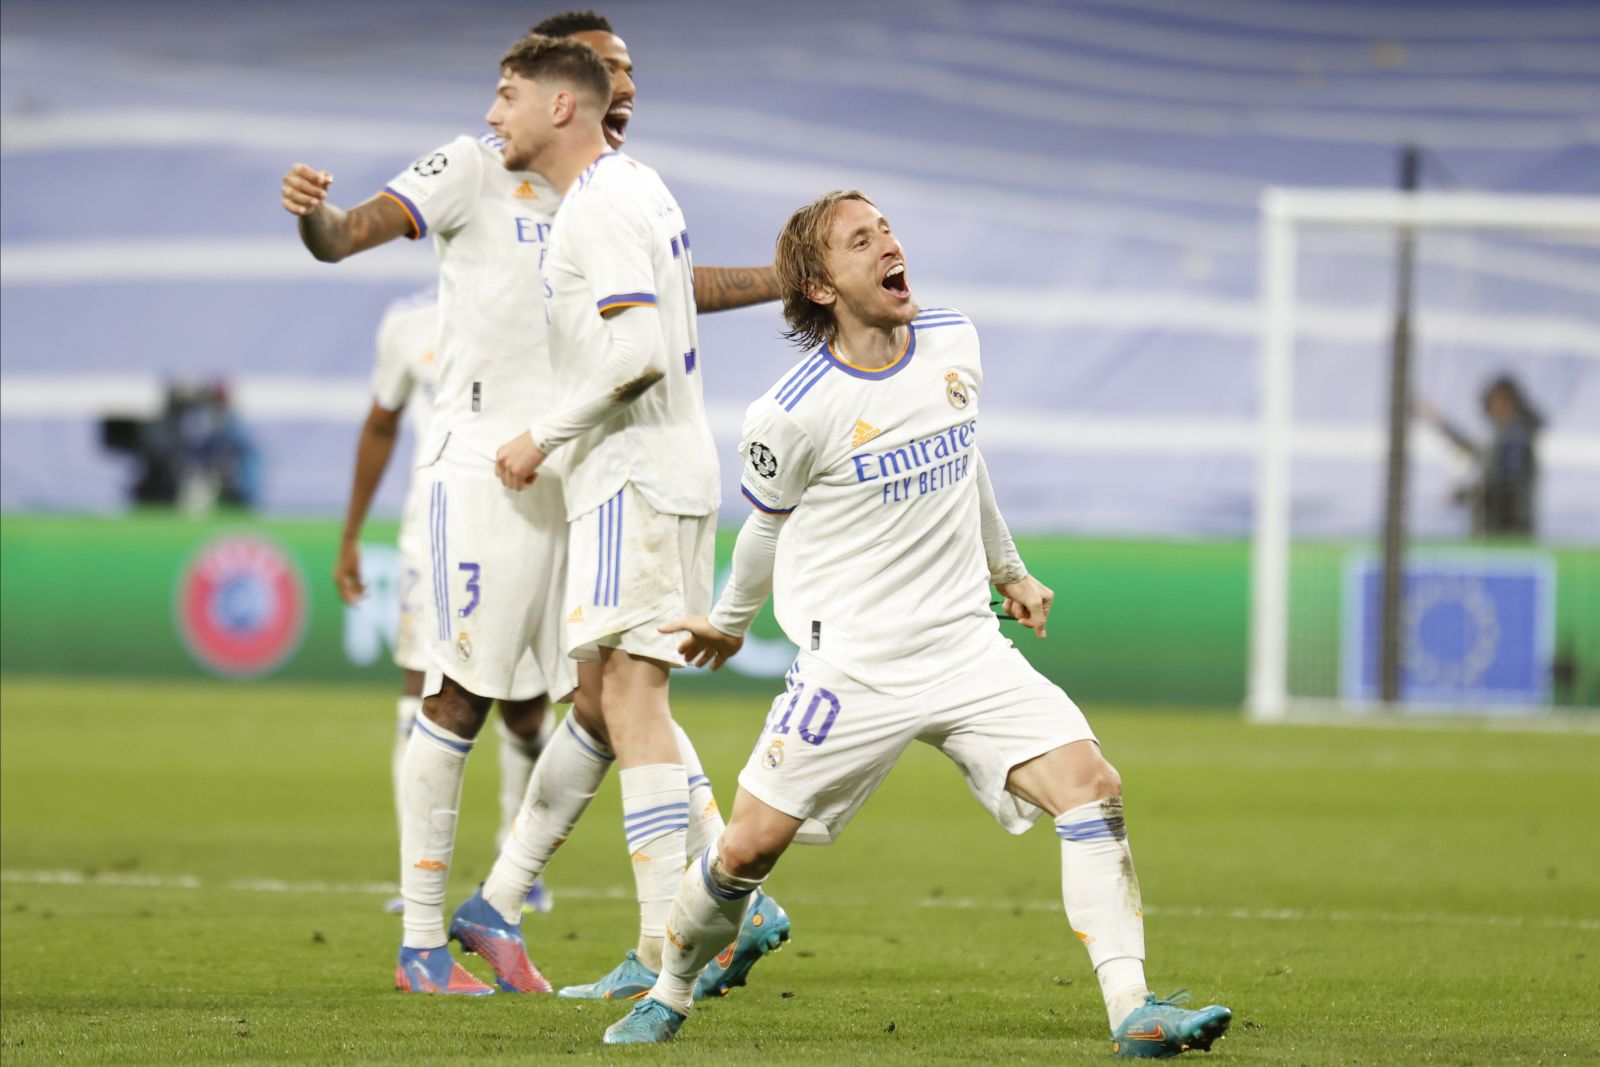 epa09813779 Real Madrid's Luka Modric (R) celebrates after the UEFA Champions League round of 16, second leg soccer match between Real Madrid and Paris Saint-Germain (PSG) in Madrid, Spain, 09 March 2022.  EPA/J.J. Guillen  EPA-EFE/J.J. Guillen